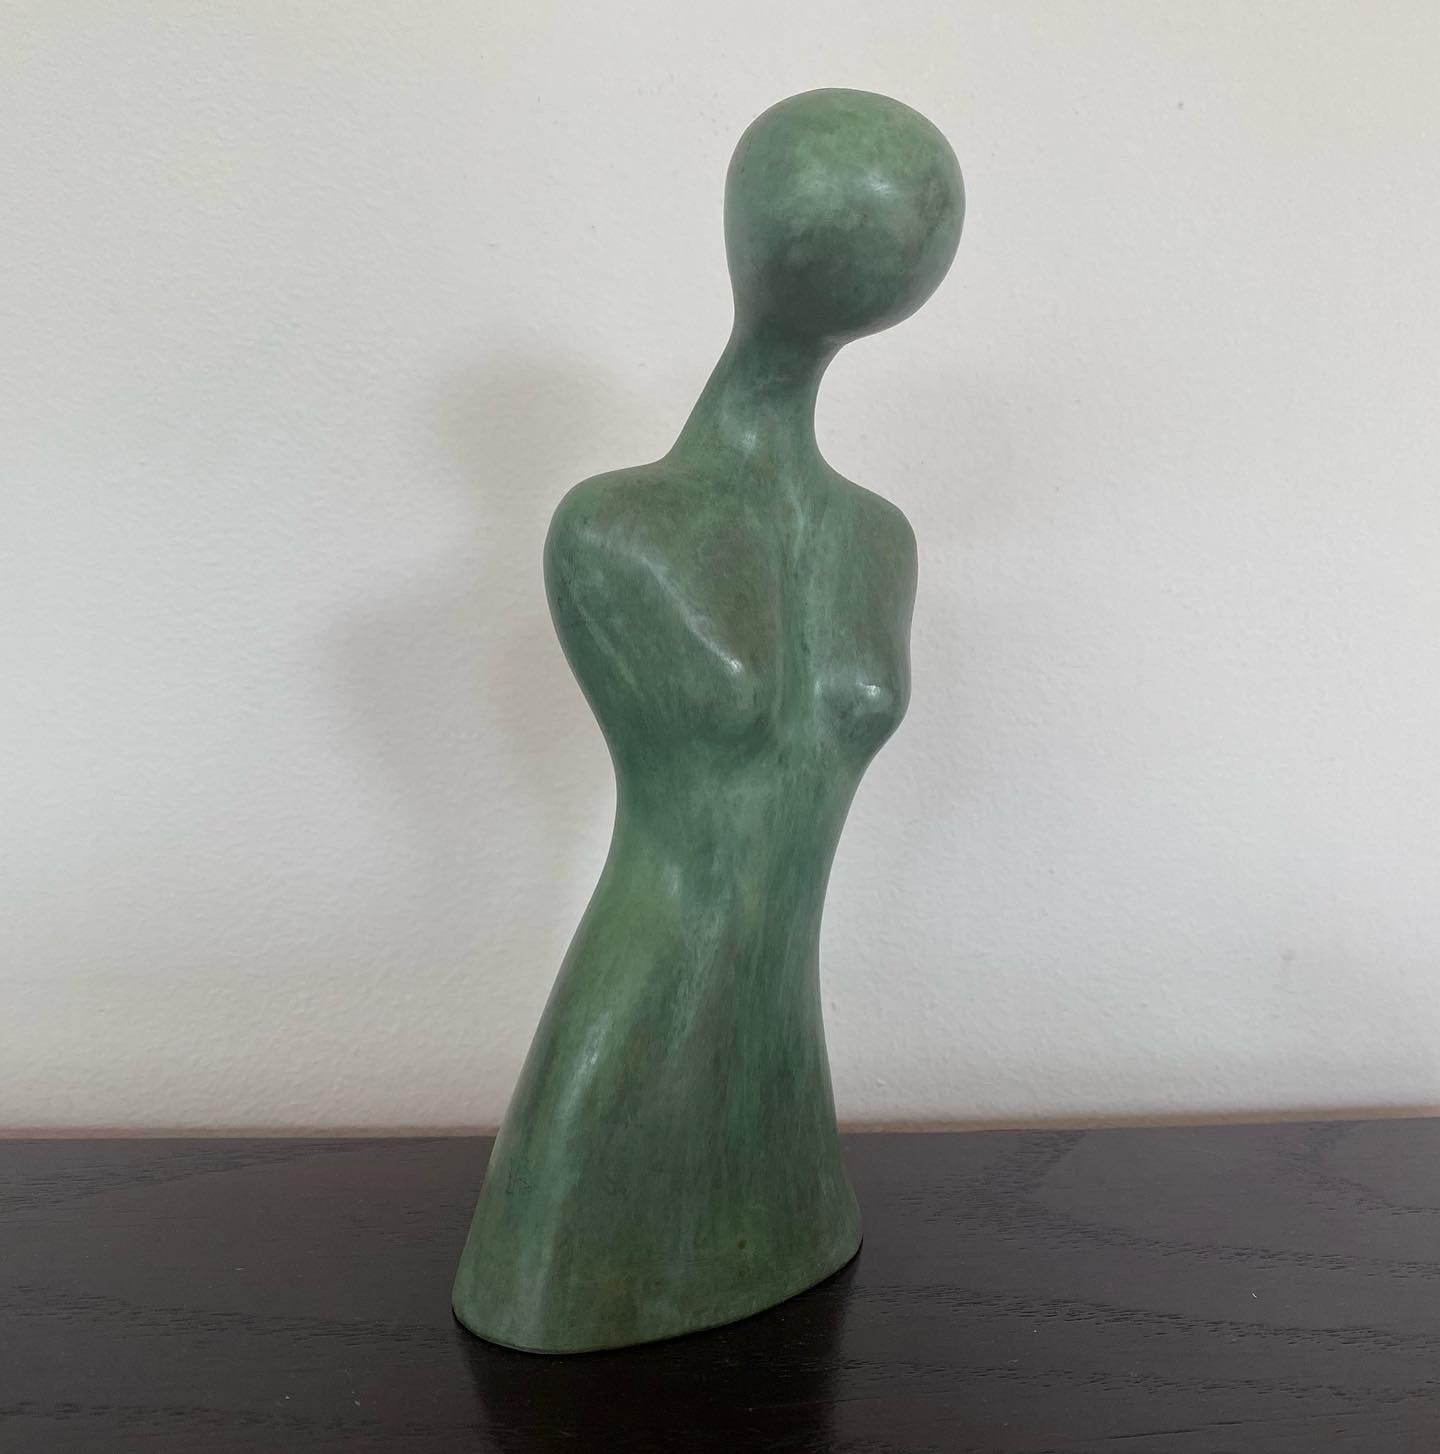 Mexican bronze Sculpture by Jennifer Troice “ untitled “